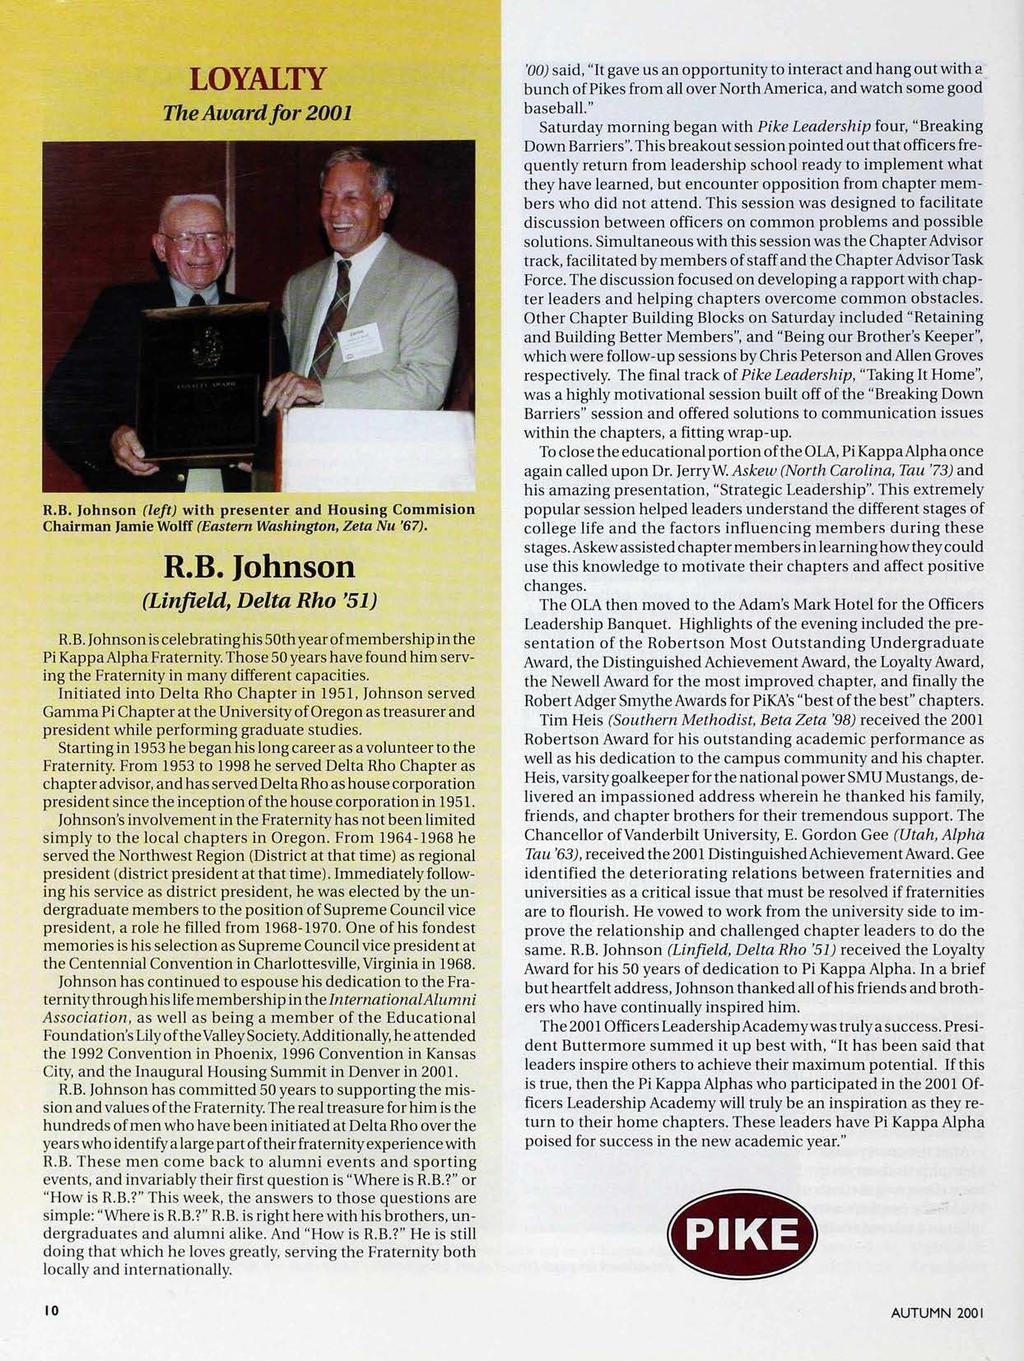 LOYALTY The Award for 2001 R.B. Johnson (left) with presenter and Housing Commision Chairman Jamie Wolff (Eastern Washington, Zeta Nu '67). R.B. Johnson (Linfield, Delta Rho '51) R.B. Johnson is celebrating his 50th year of membership in the Pi Kappa Alpha Fraternity.